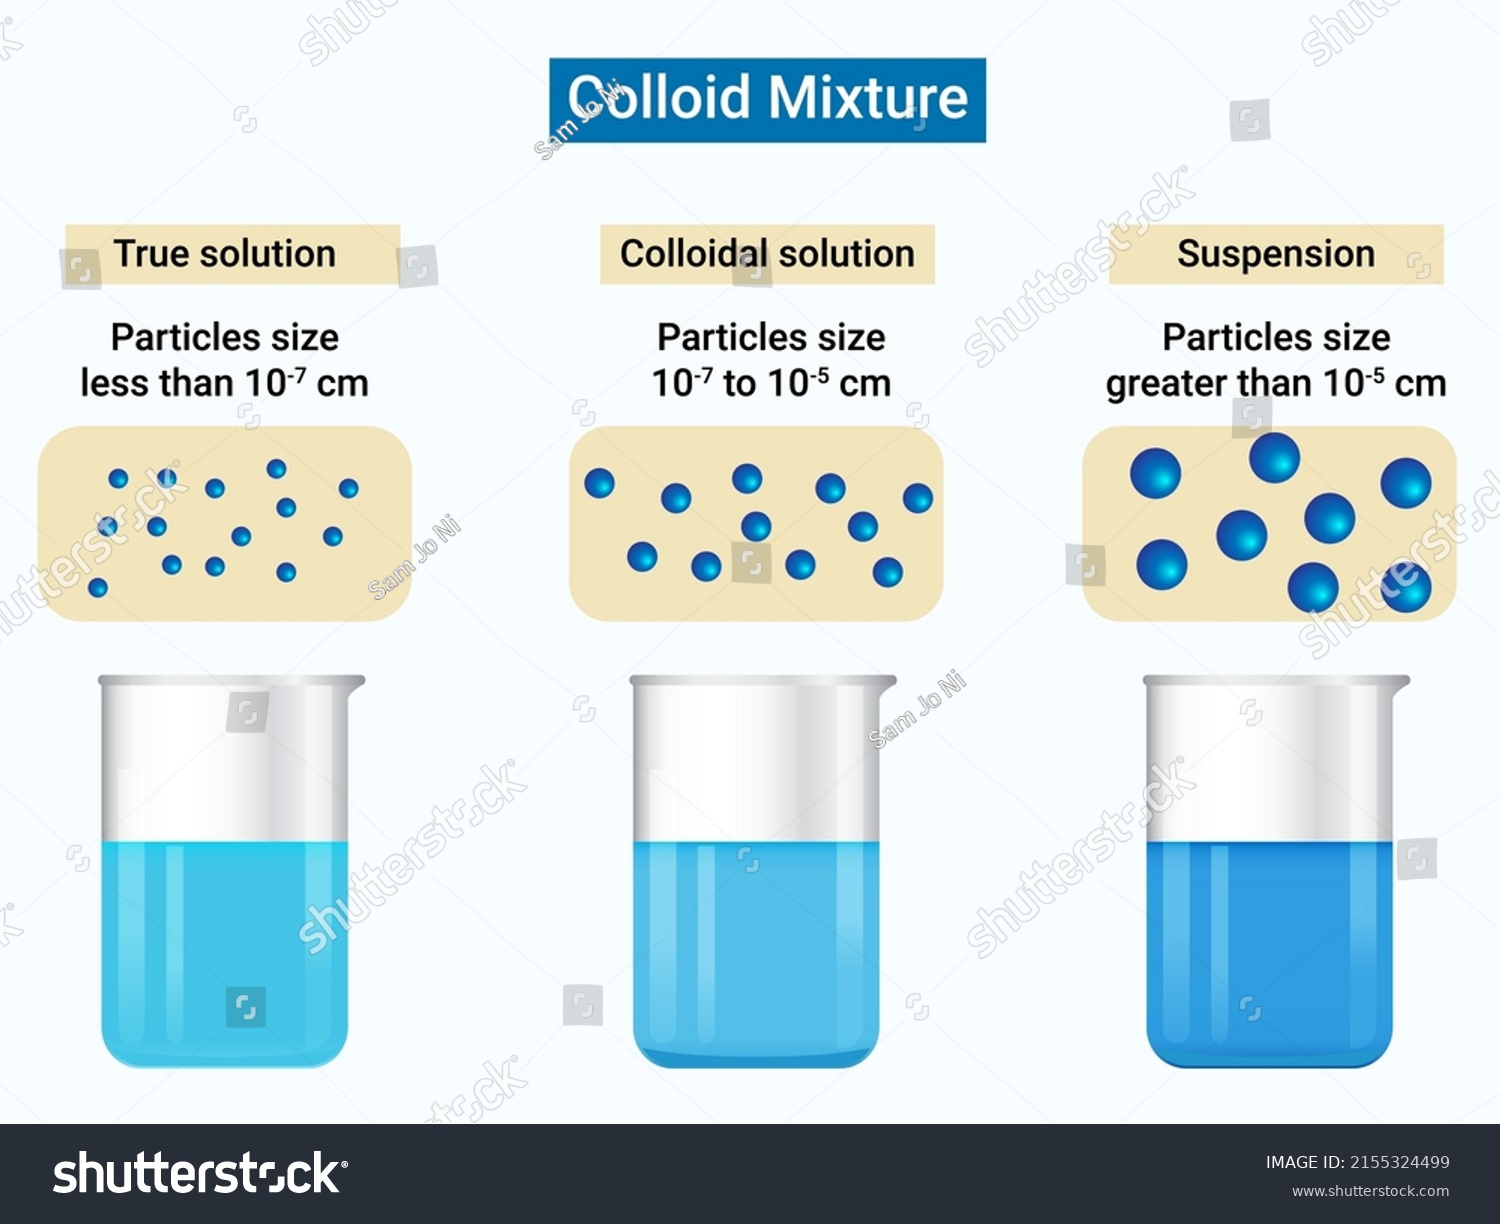 example of colloid mixture